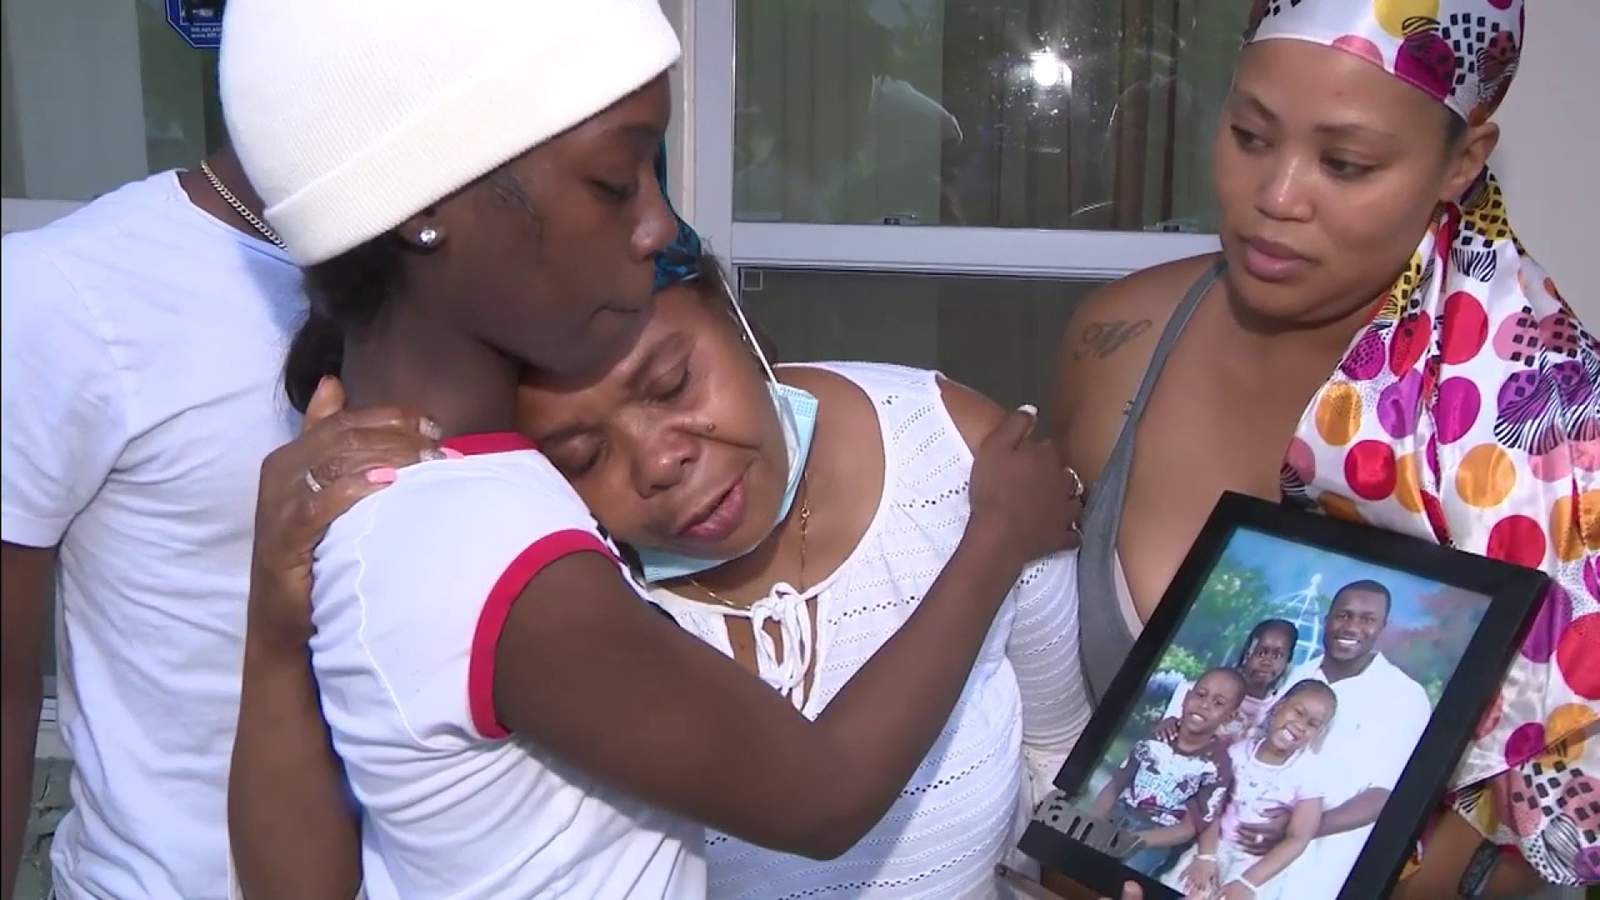 Mother’s plea after murder at Hard Rock: ‘Help me find my son’s killer’